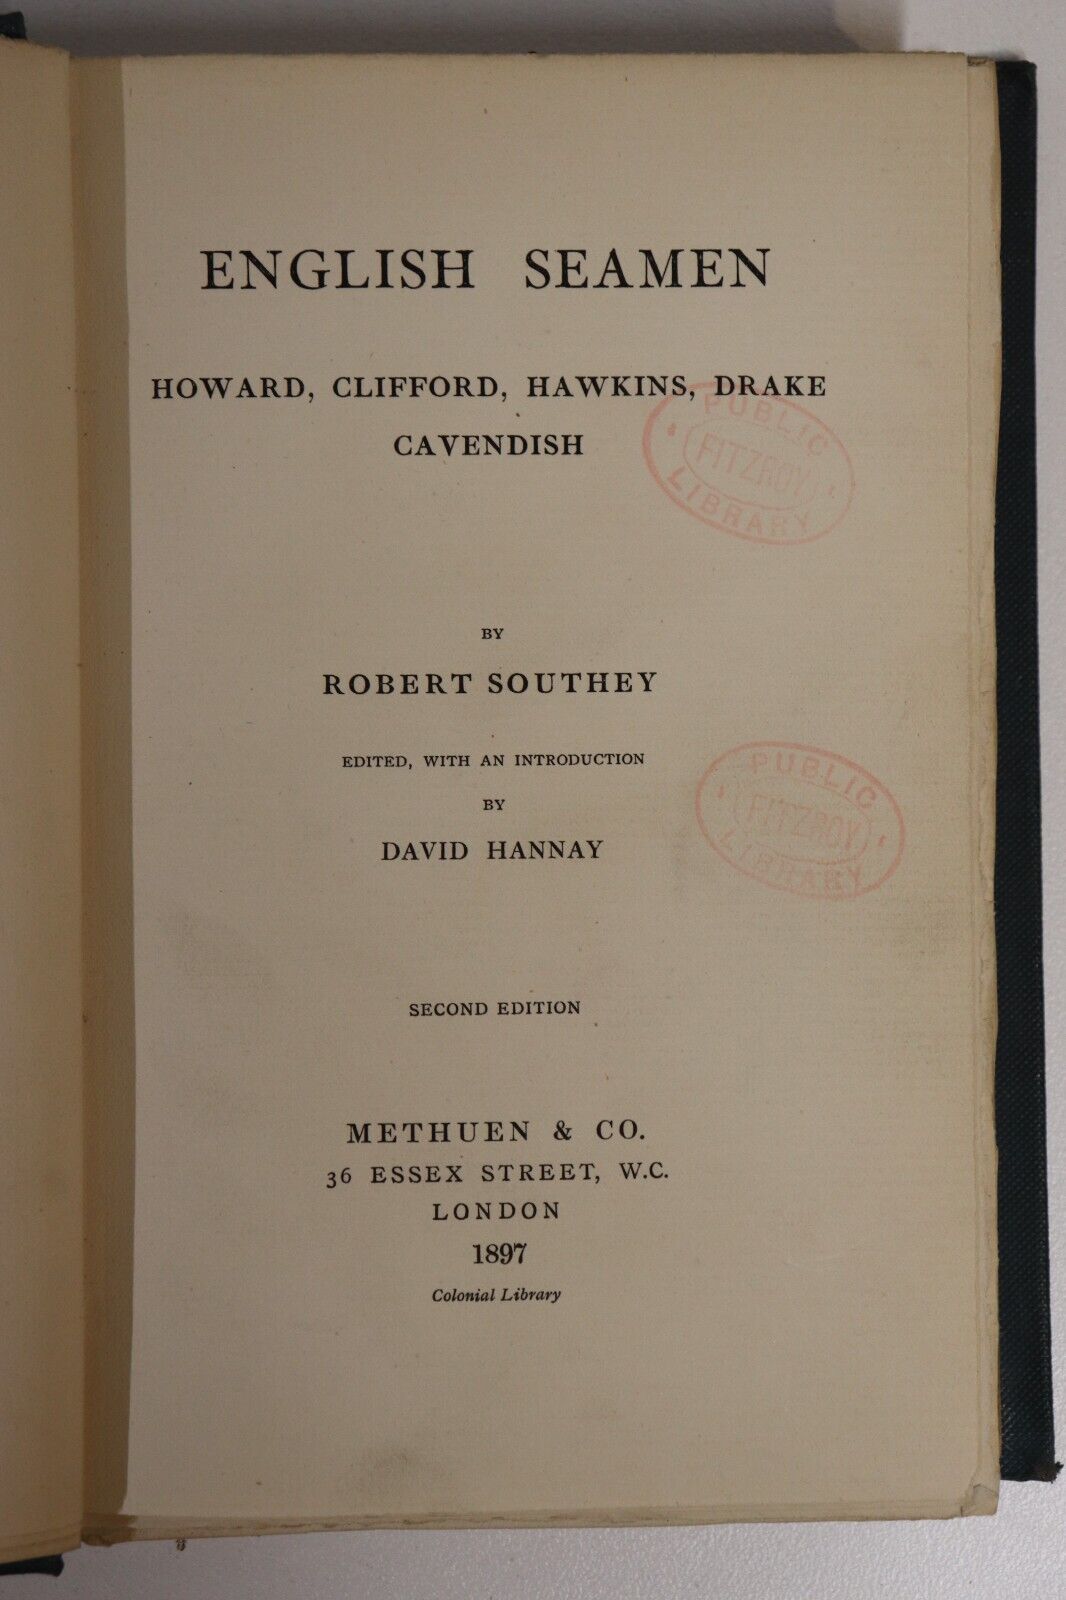 English Seamen by Robert Southey - 1897 - Antique Maritime History Book - 0